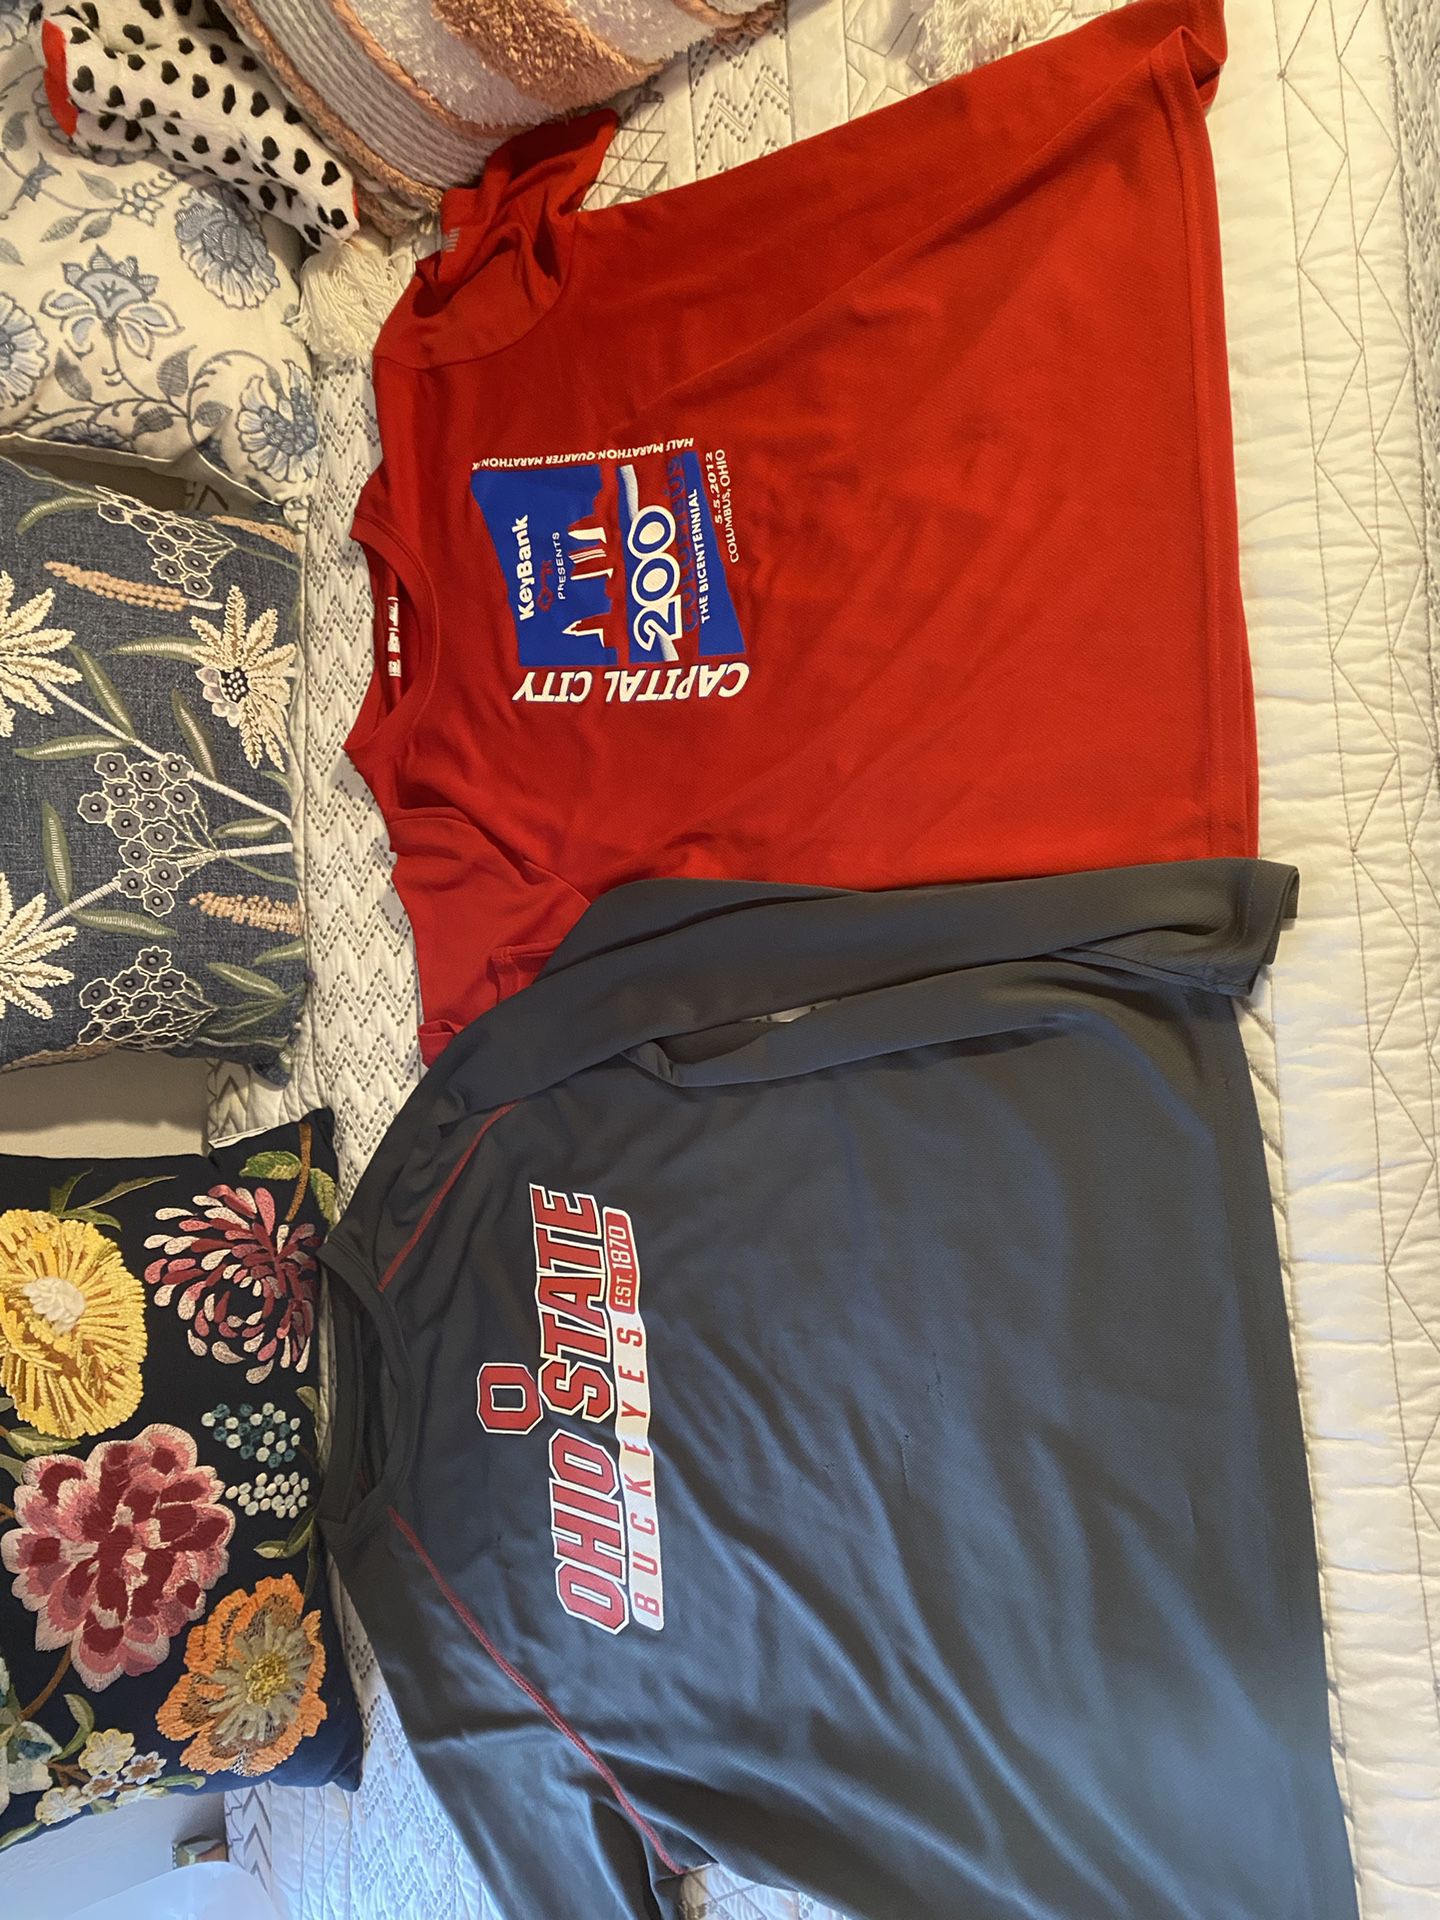 OSU and other sports shirts 